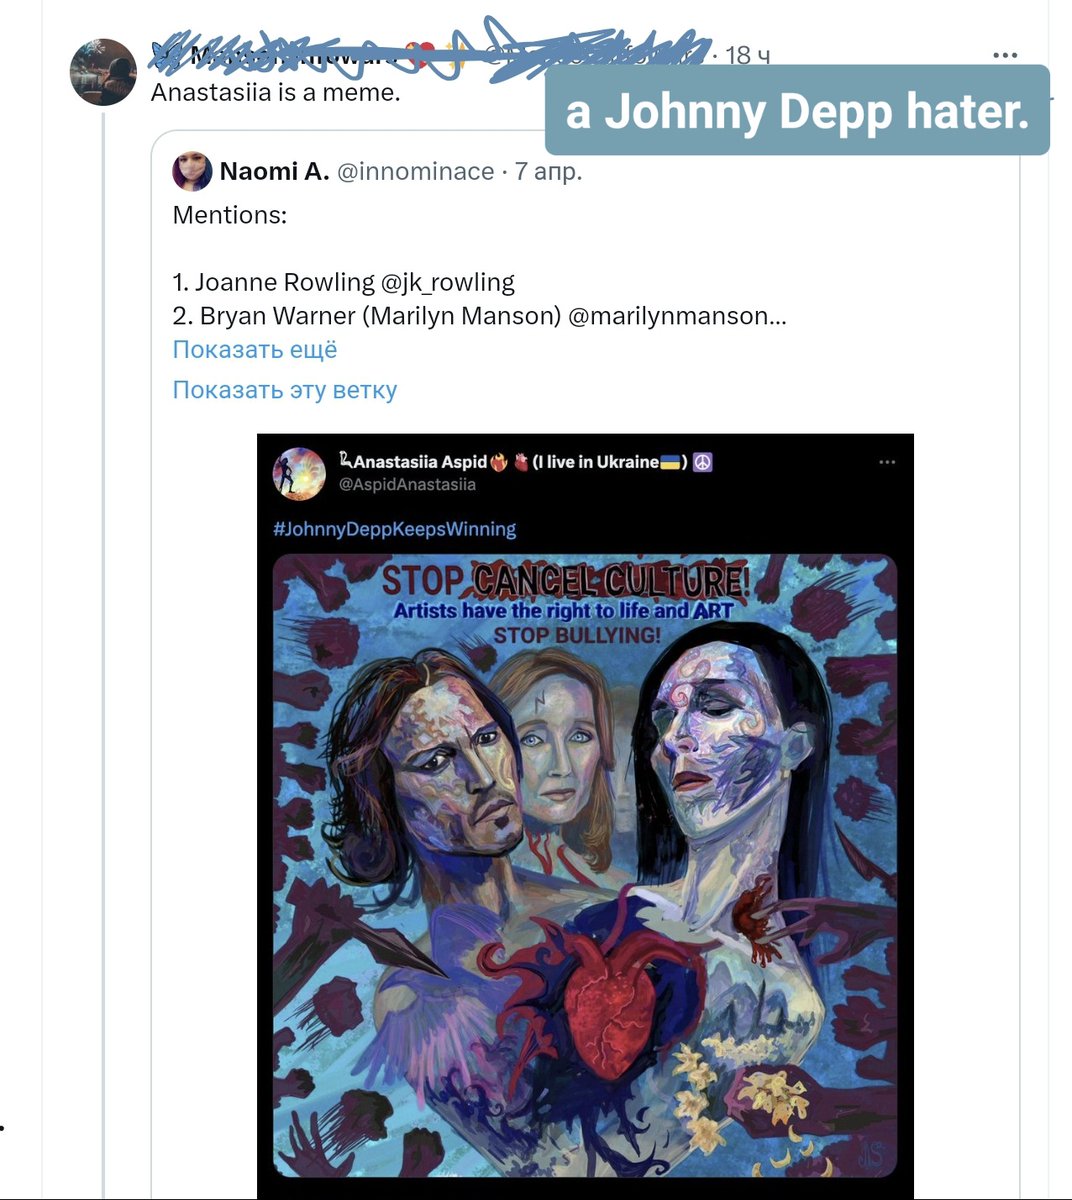 Of course, Misinforwars jumped on the bandwagon and is trying to bully me🫣

#IstandwithMarilynManson #MarilynManson #cancelculture #JohnnyDeppIsABeautifulSoul #JohnnyDeppIsALegend #metoo #mepoo #mentoo #JohnnyDeppBestActor